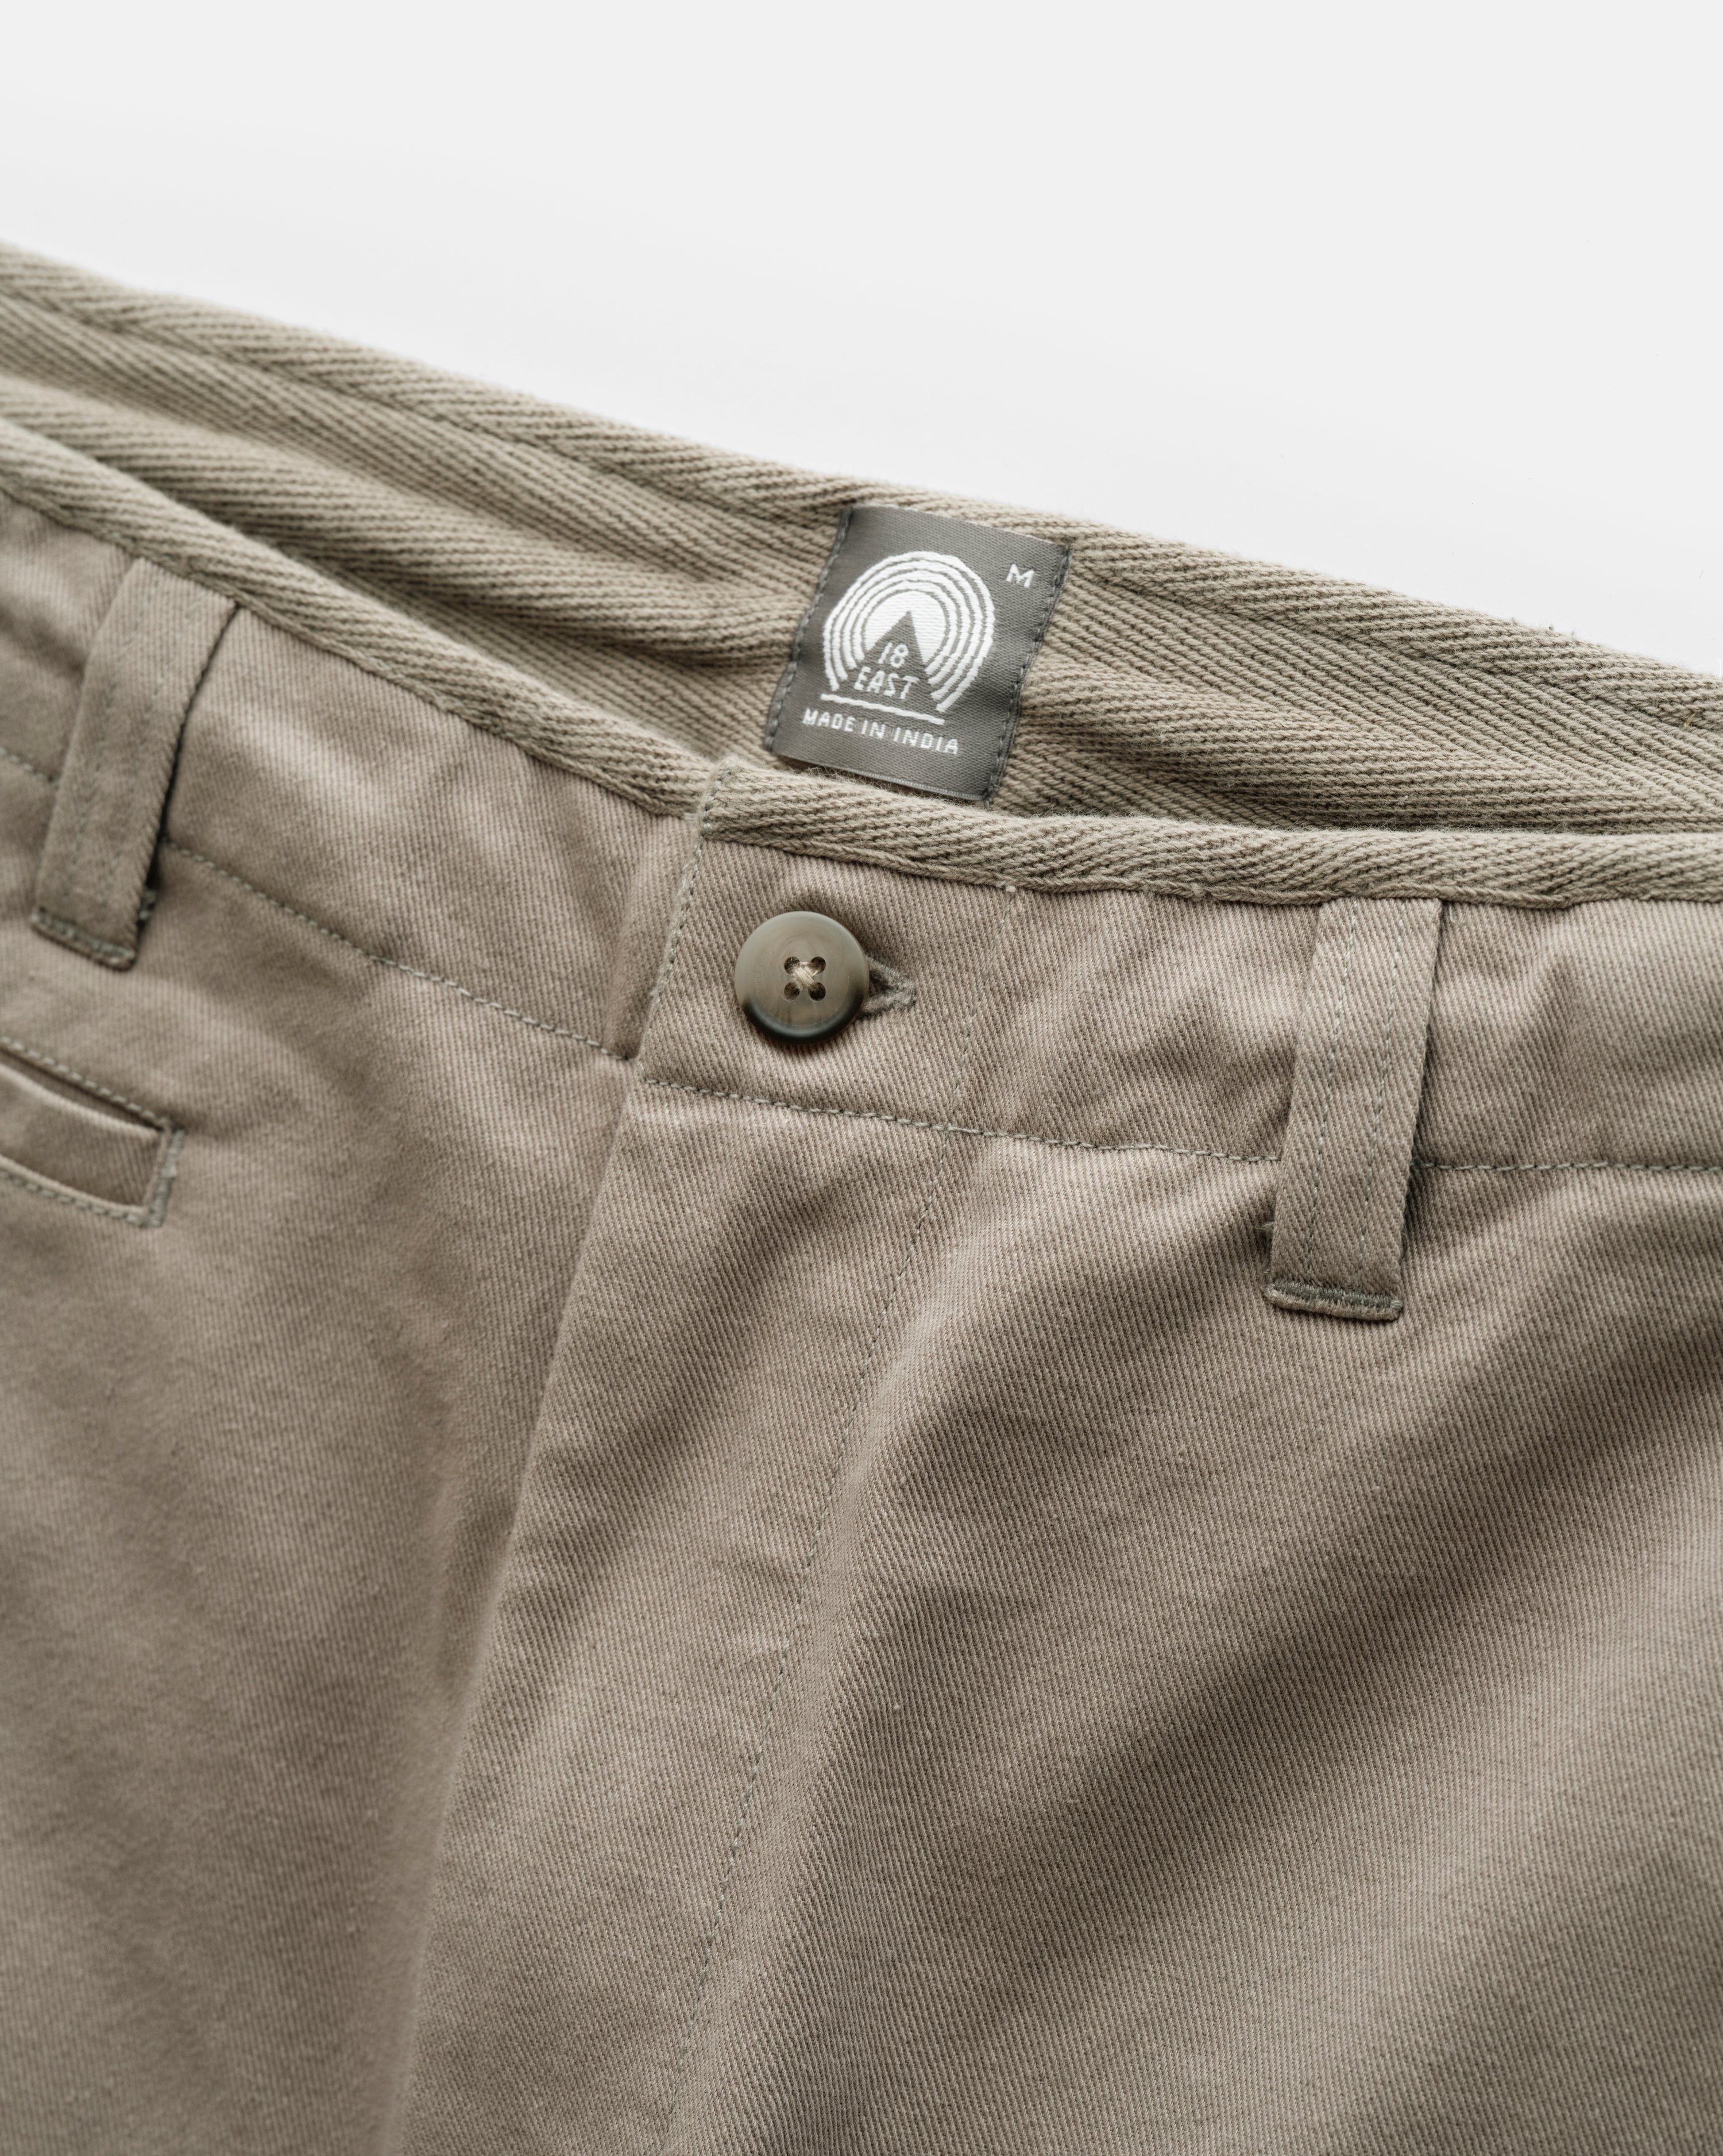 SHELTER PANT - PLAZA TAUPE HOMEGROWN TWILL